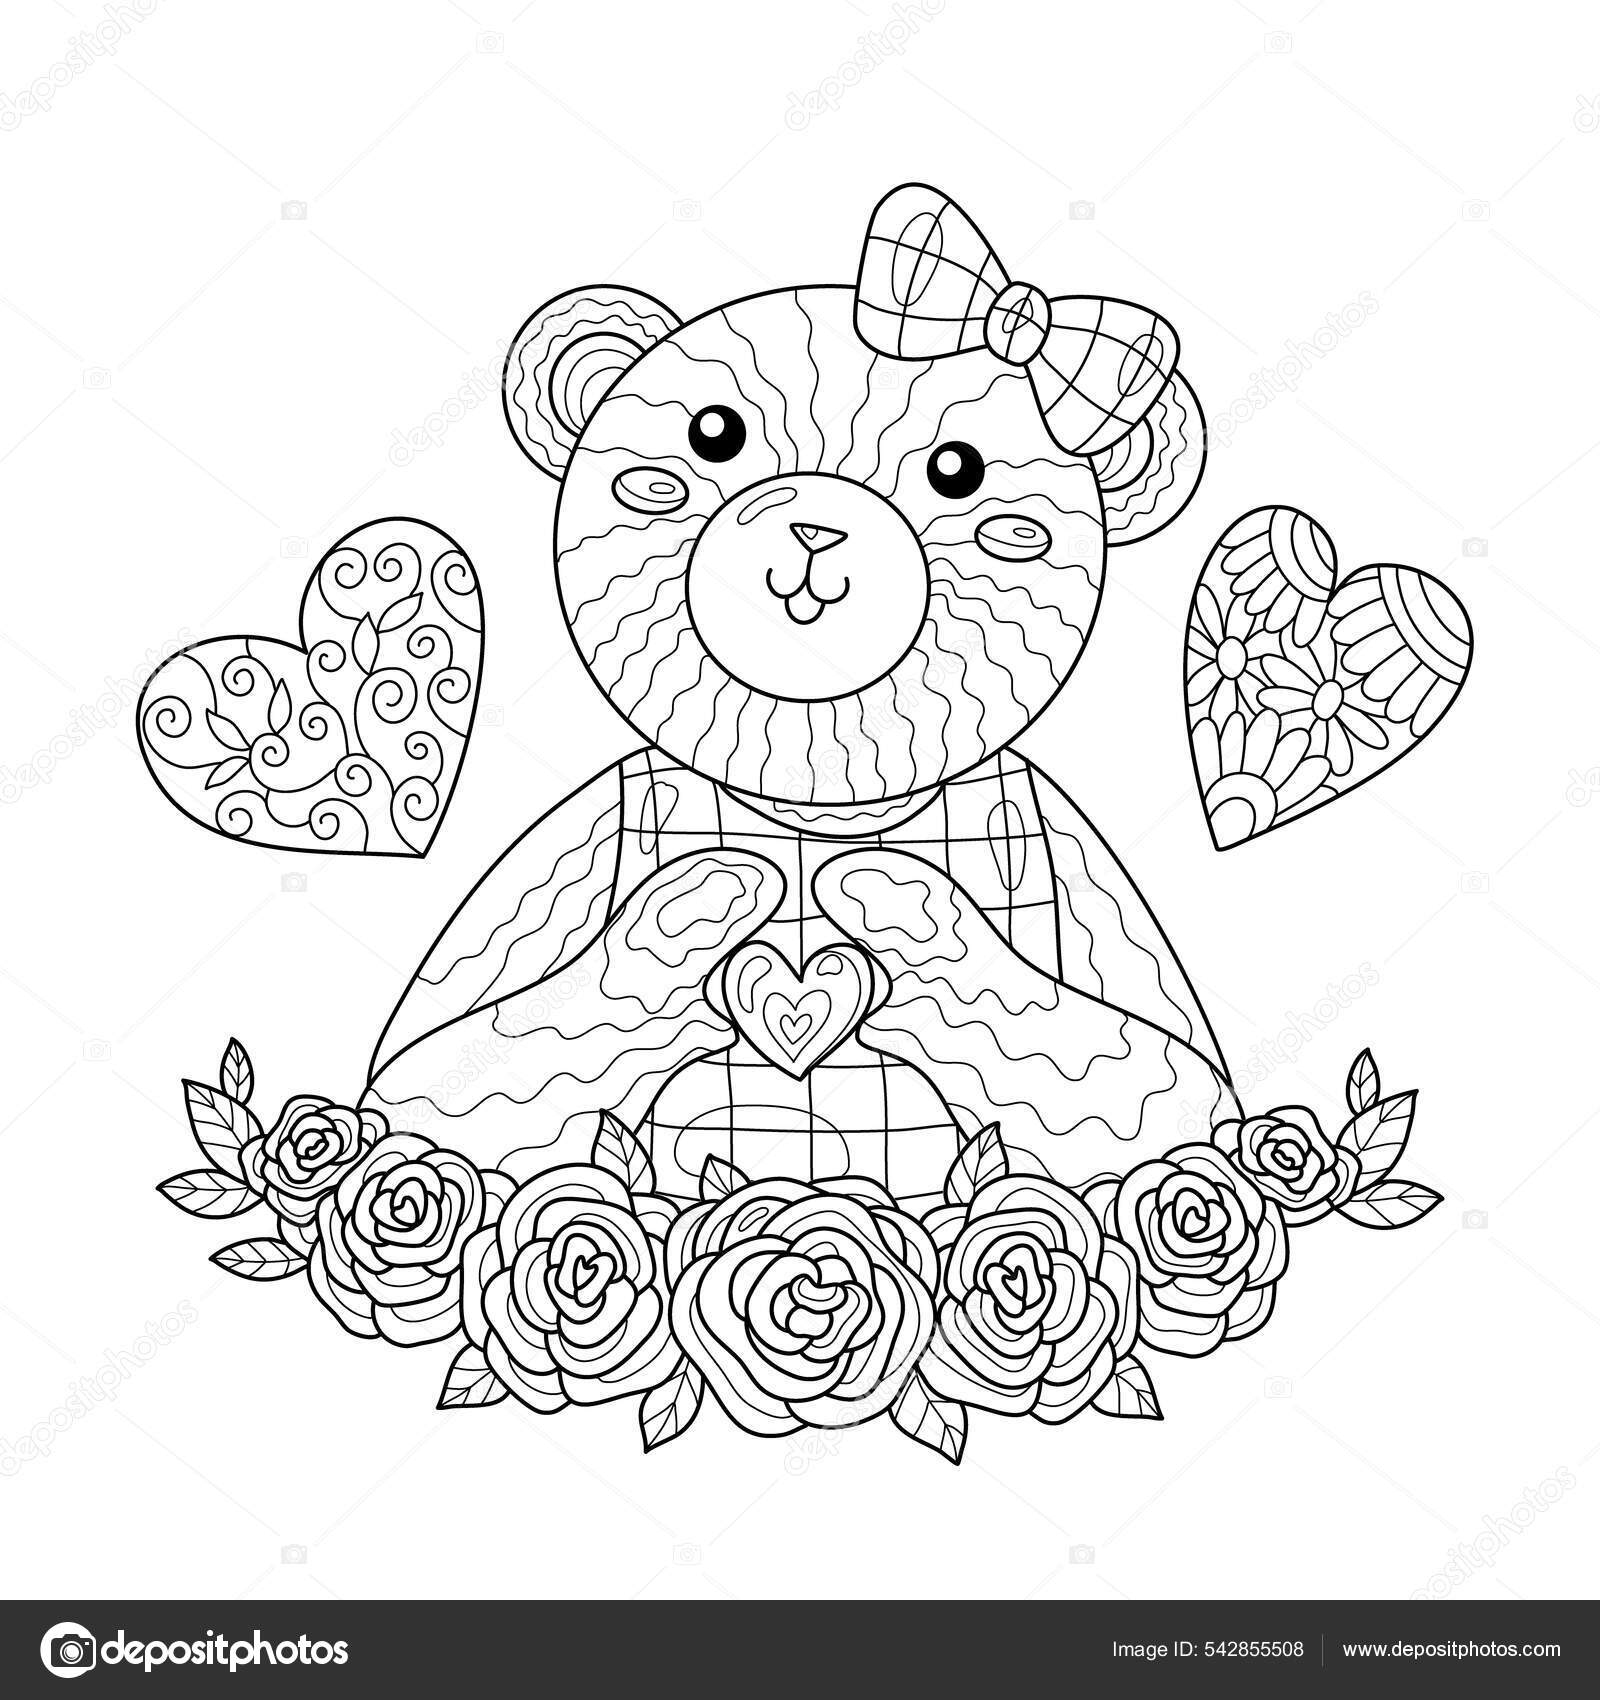 Lovely teddy bear show heart valentine day roses coloring book stock vector by daniellabelaya